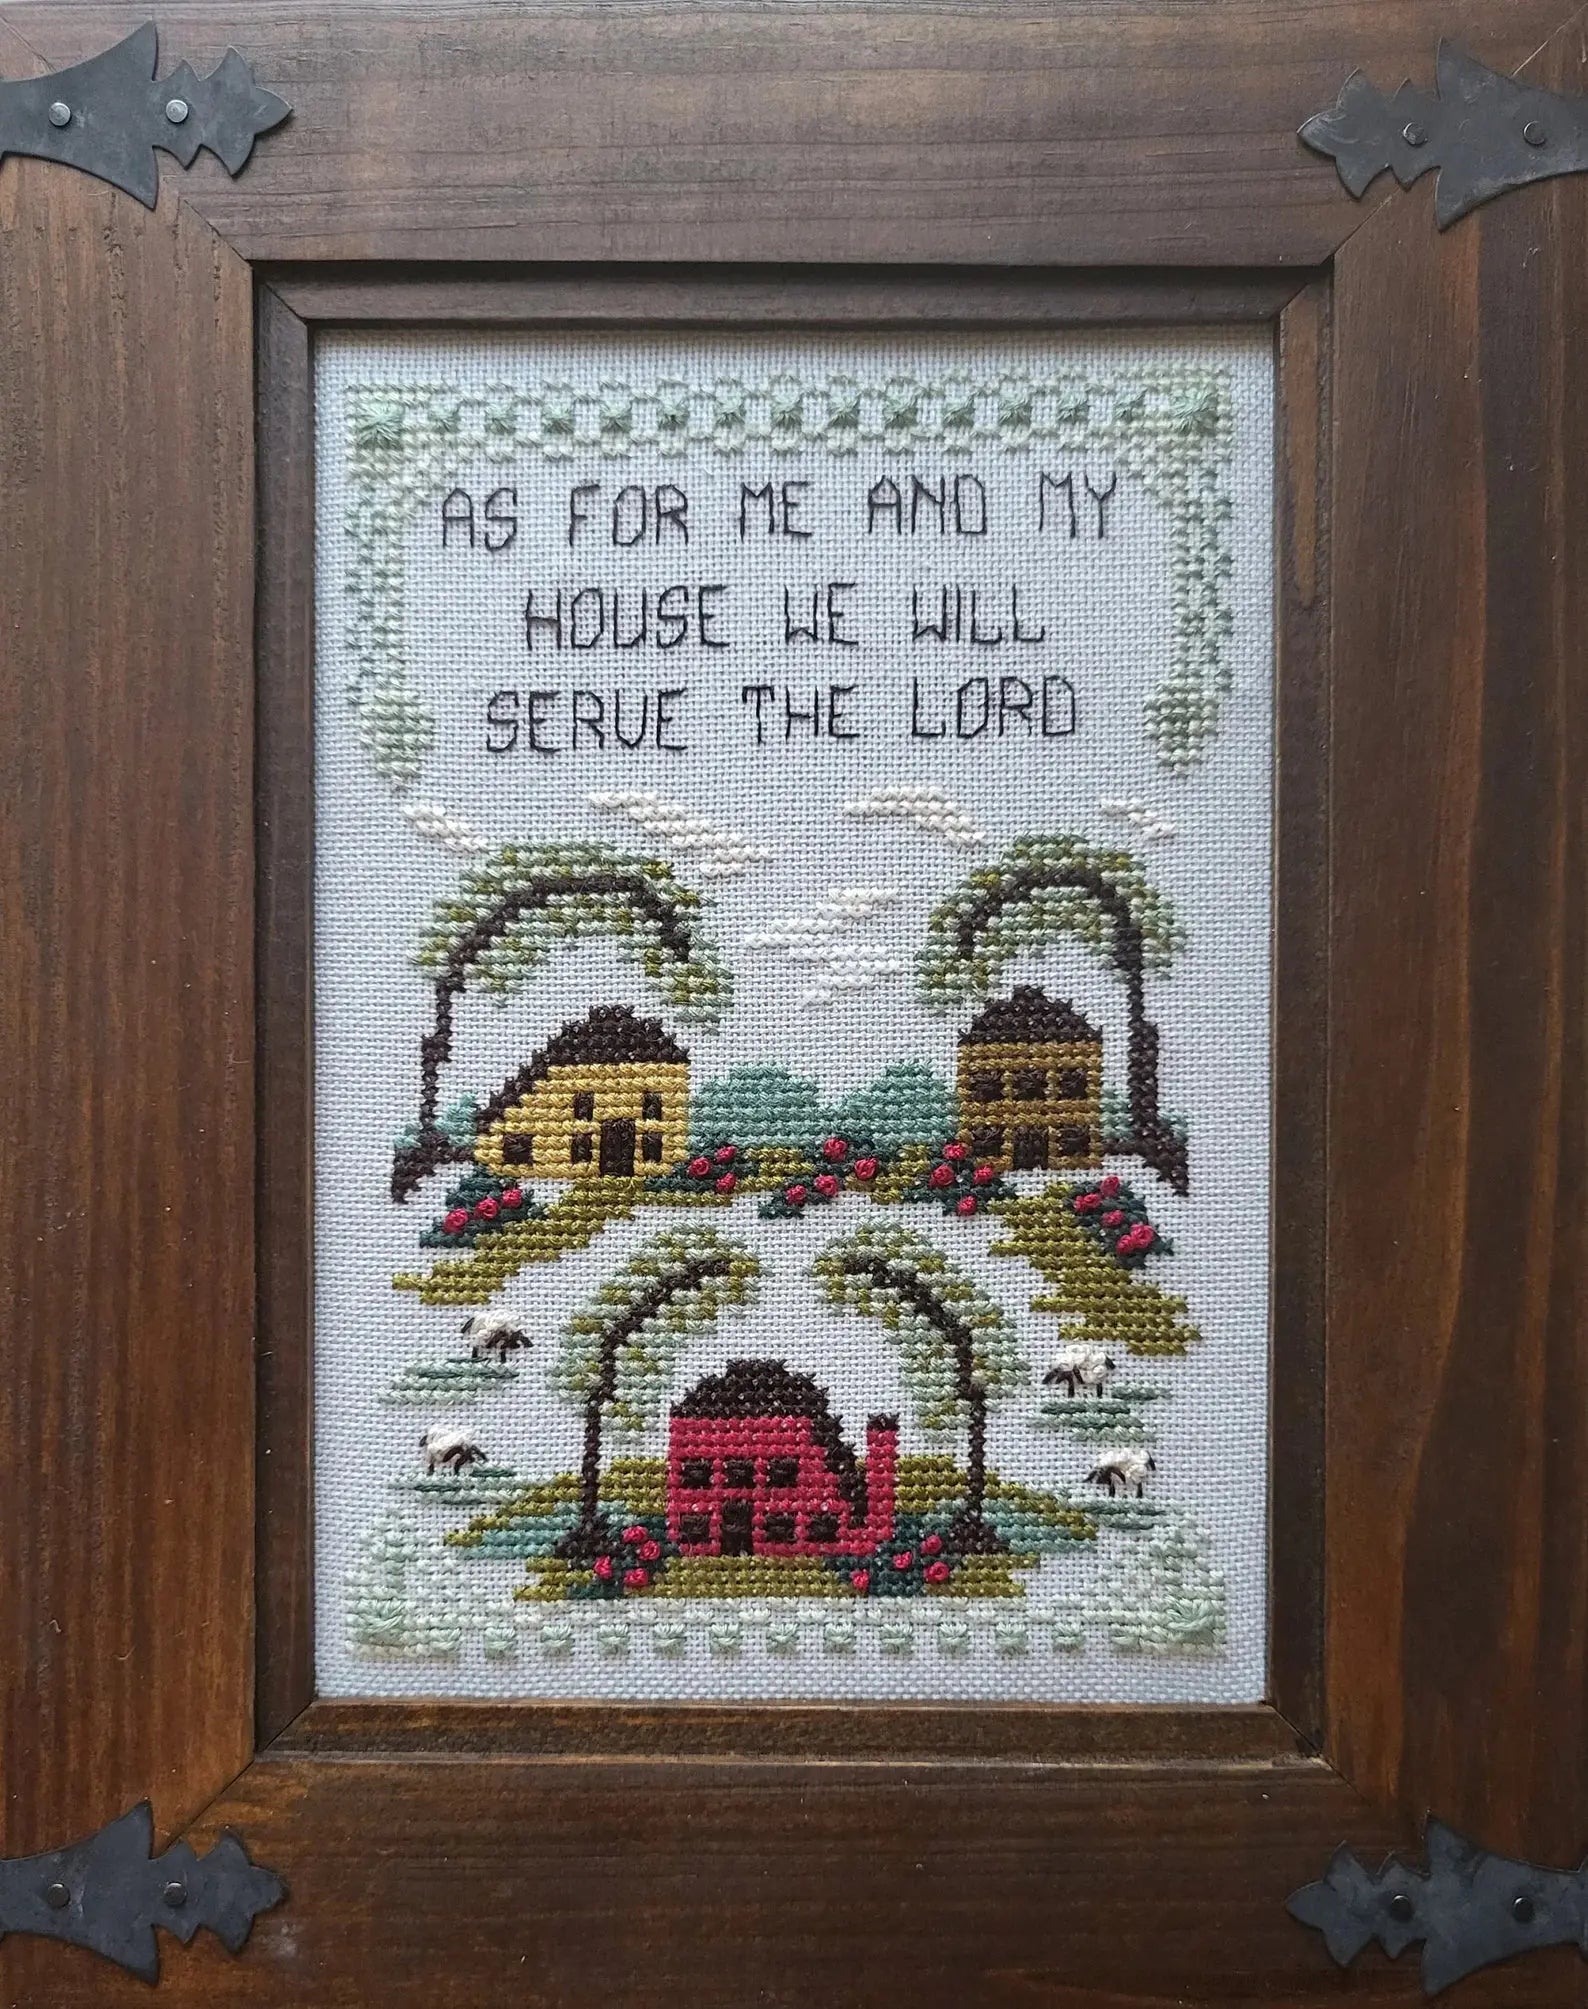 As for Me and My House by By the Bay Needleart By the Bay Needleart